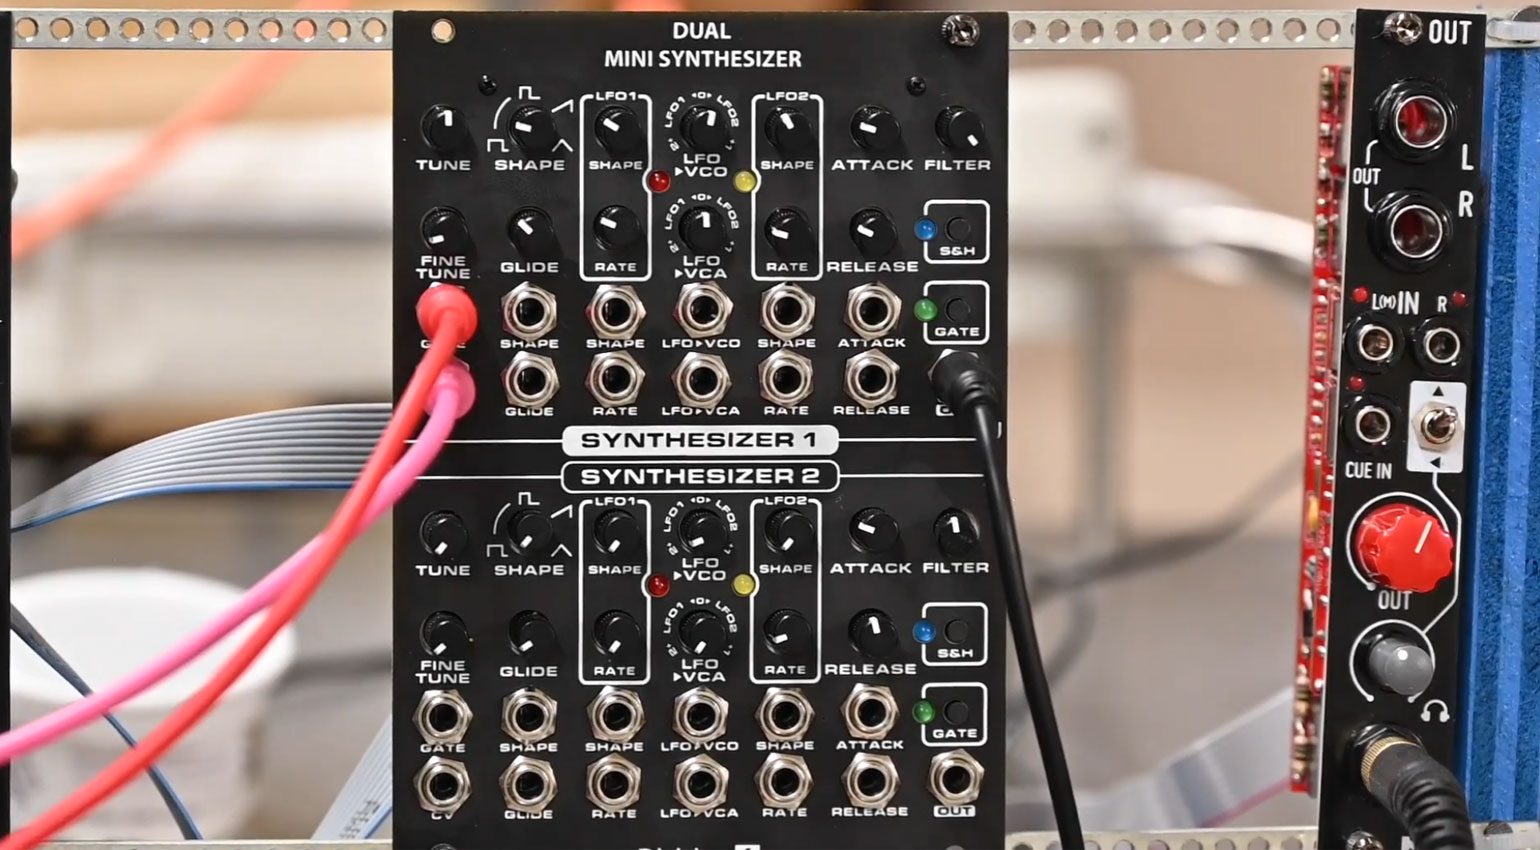 Division 6 Dual Mini Synthesizer